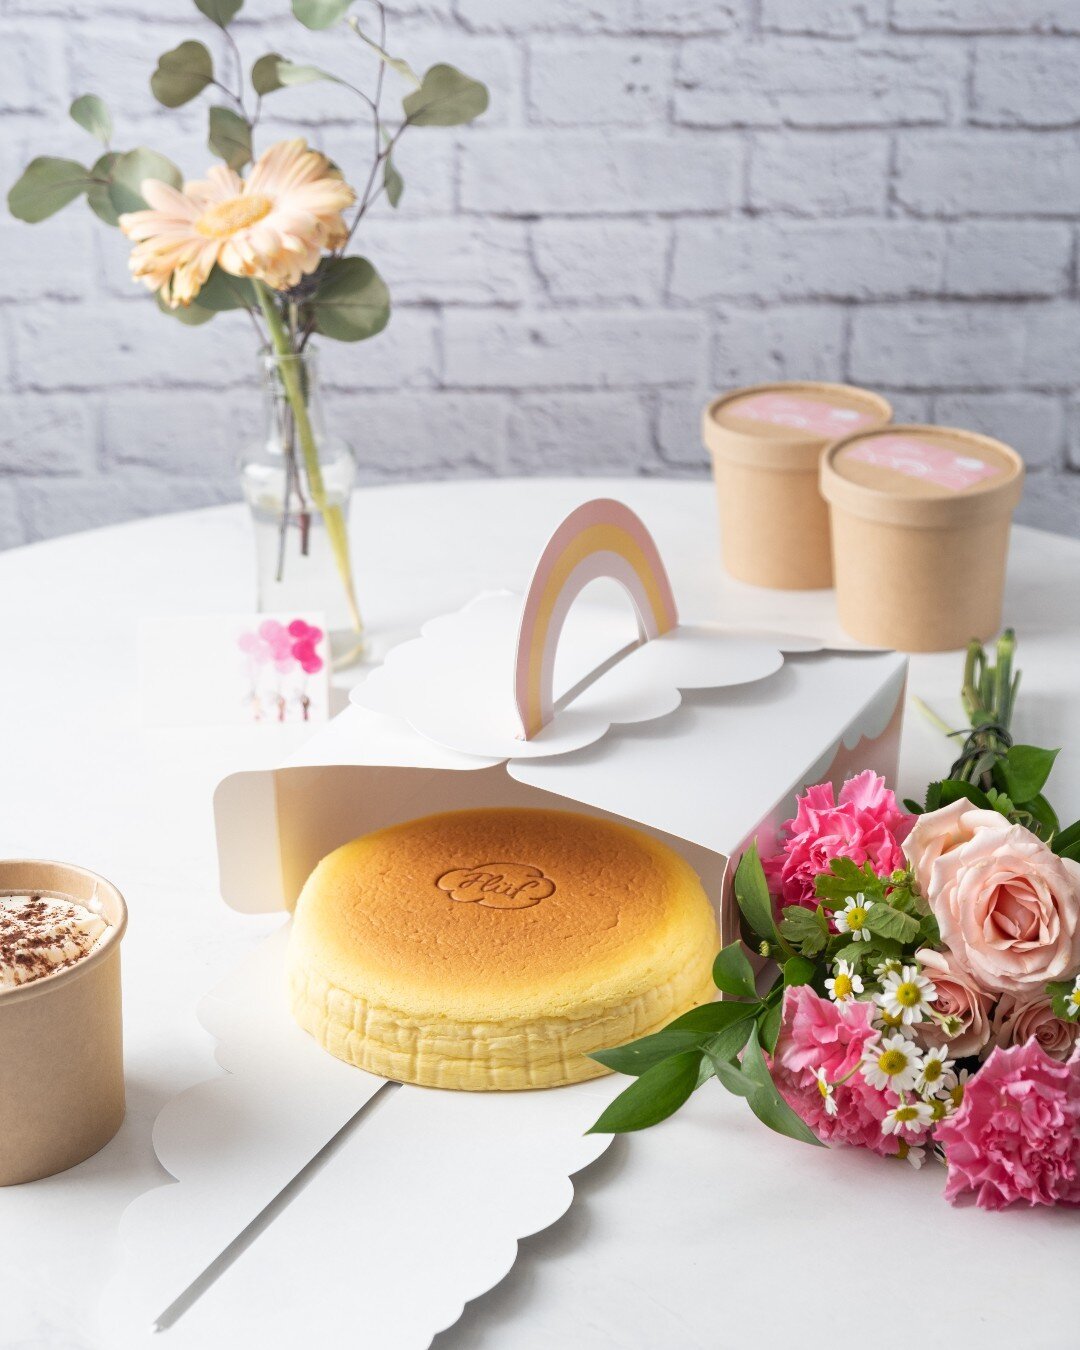 Happy Mother's Day! 💐 We're celebrating all the supermoms out there with 10% OFF in-store!

Secure your spot as the favourite child and give mom the gift of delicious, fluffy cheesecake 🍰 💝  #FlufOakville